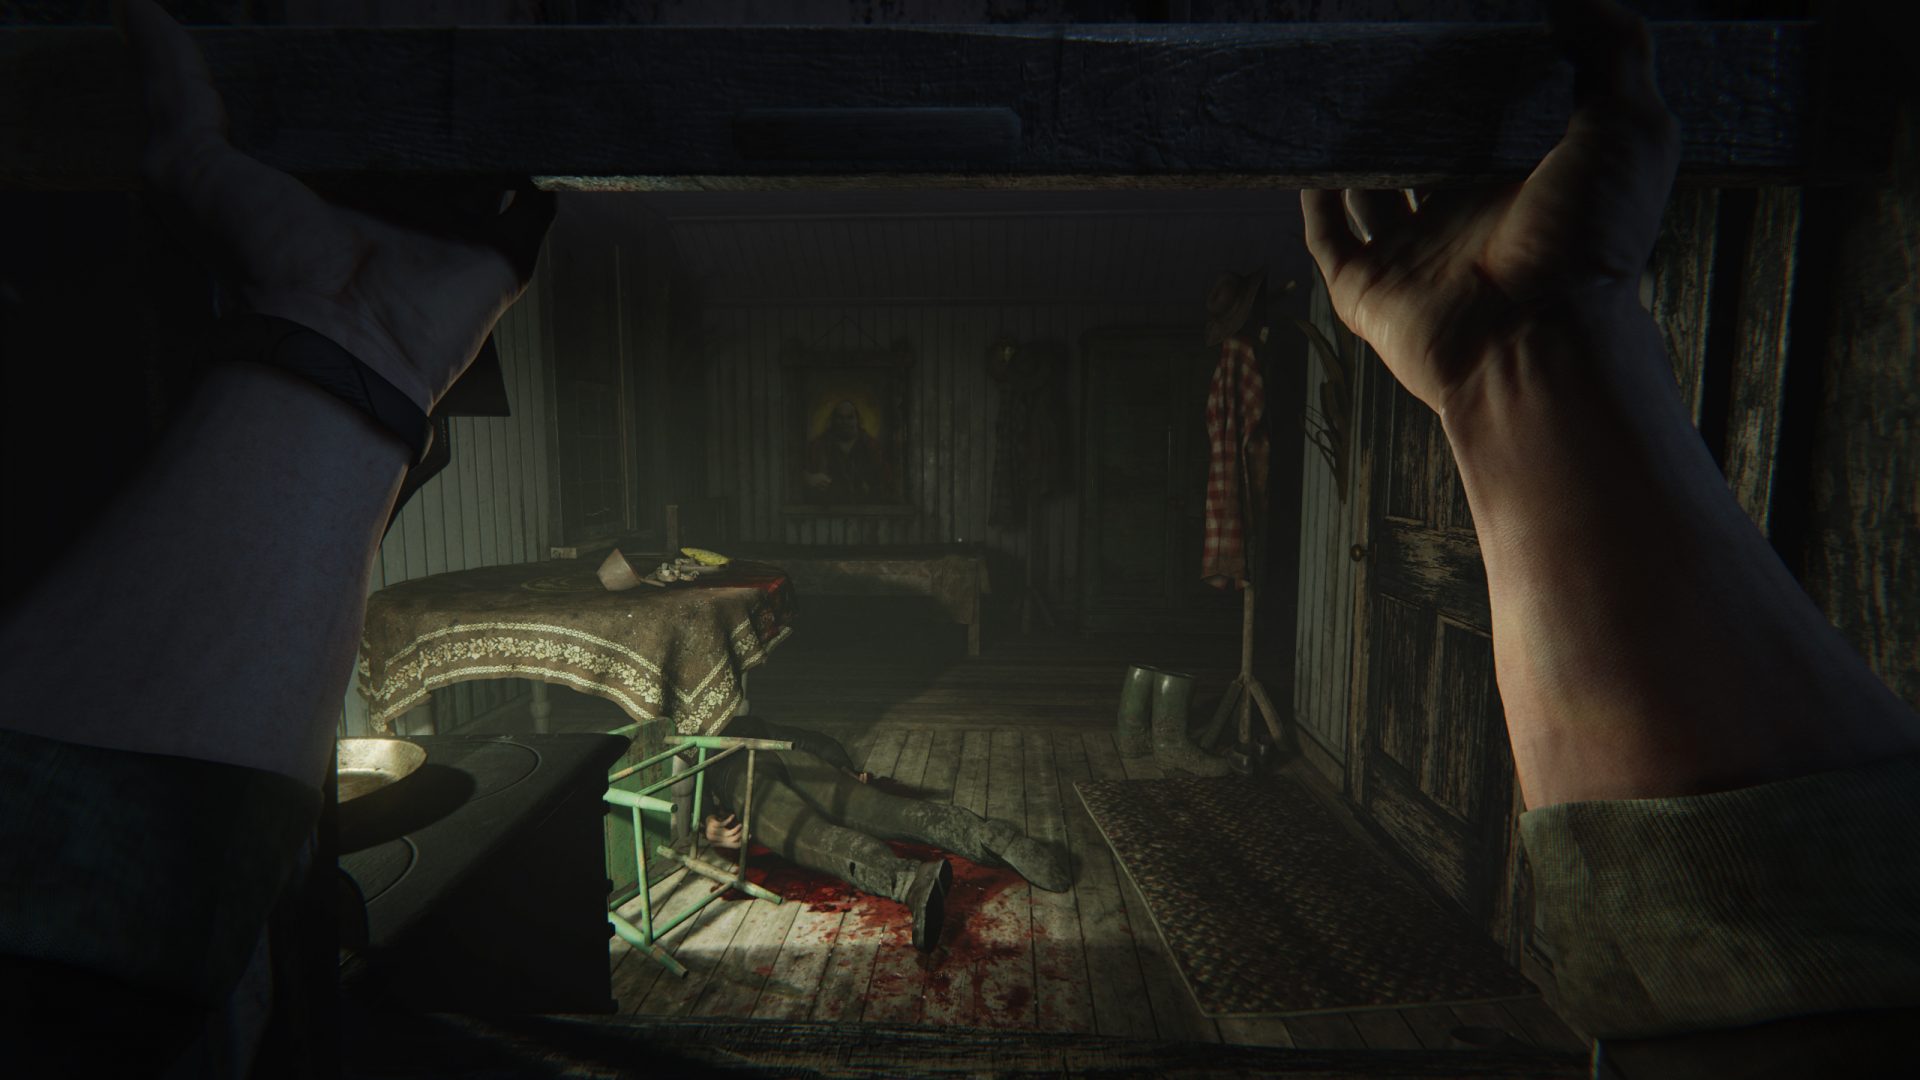 the outlast trials ps4